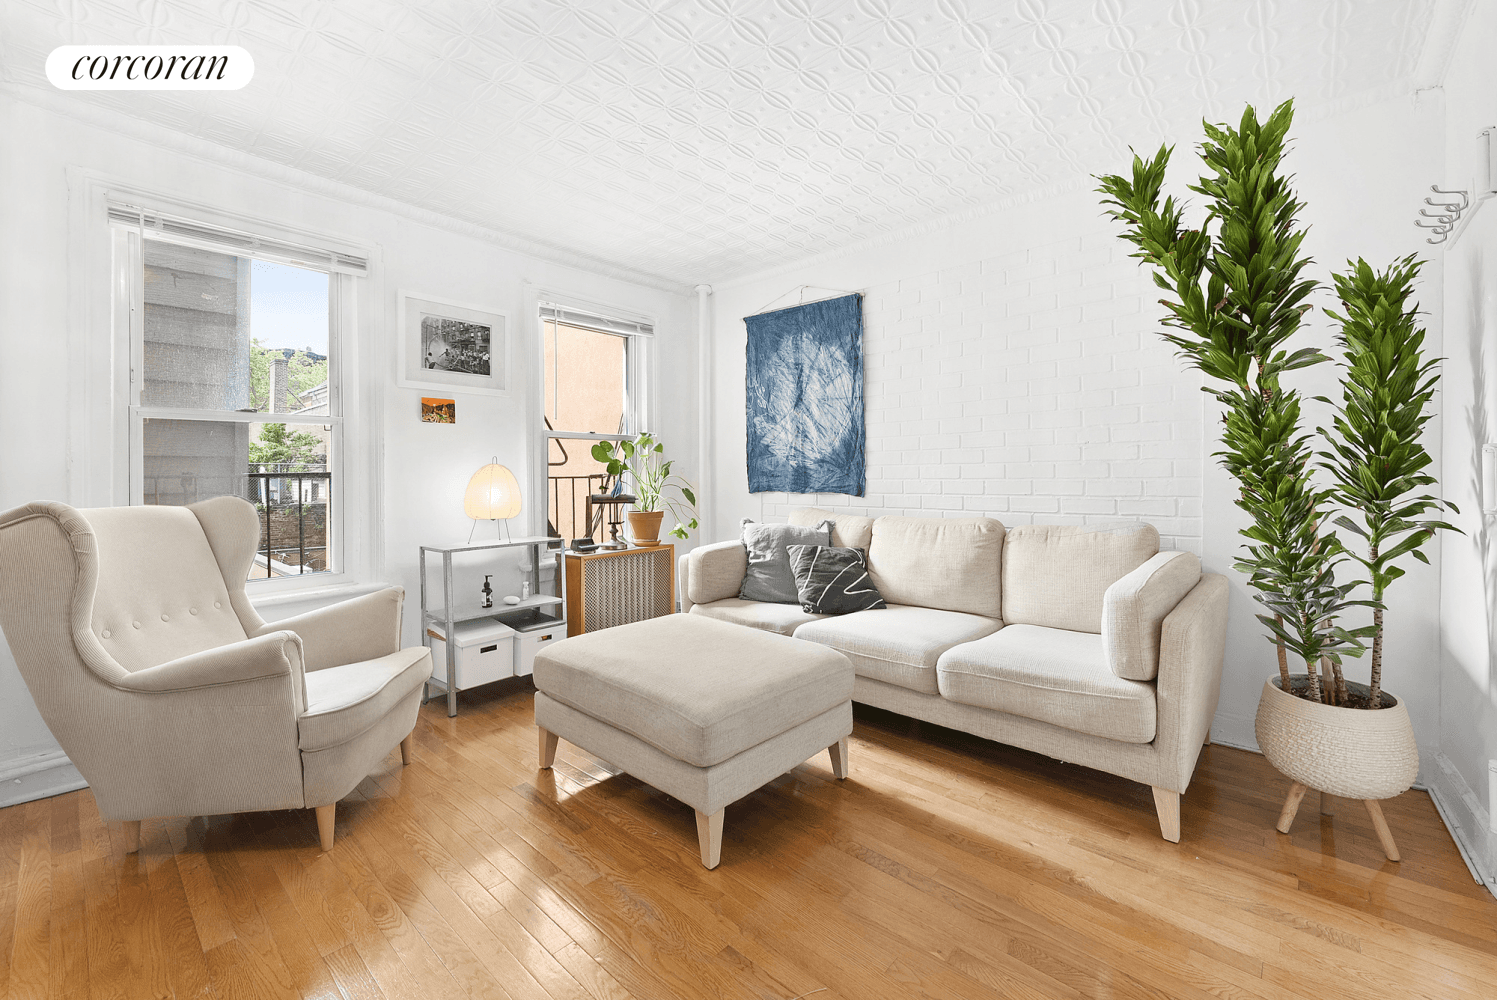 Welcome home to 152 Java Street a spacious 1 bed, flex 2 bedroom apartment nestled on one of Greenpoint's most coveted and beautiful tree lined streets.